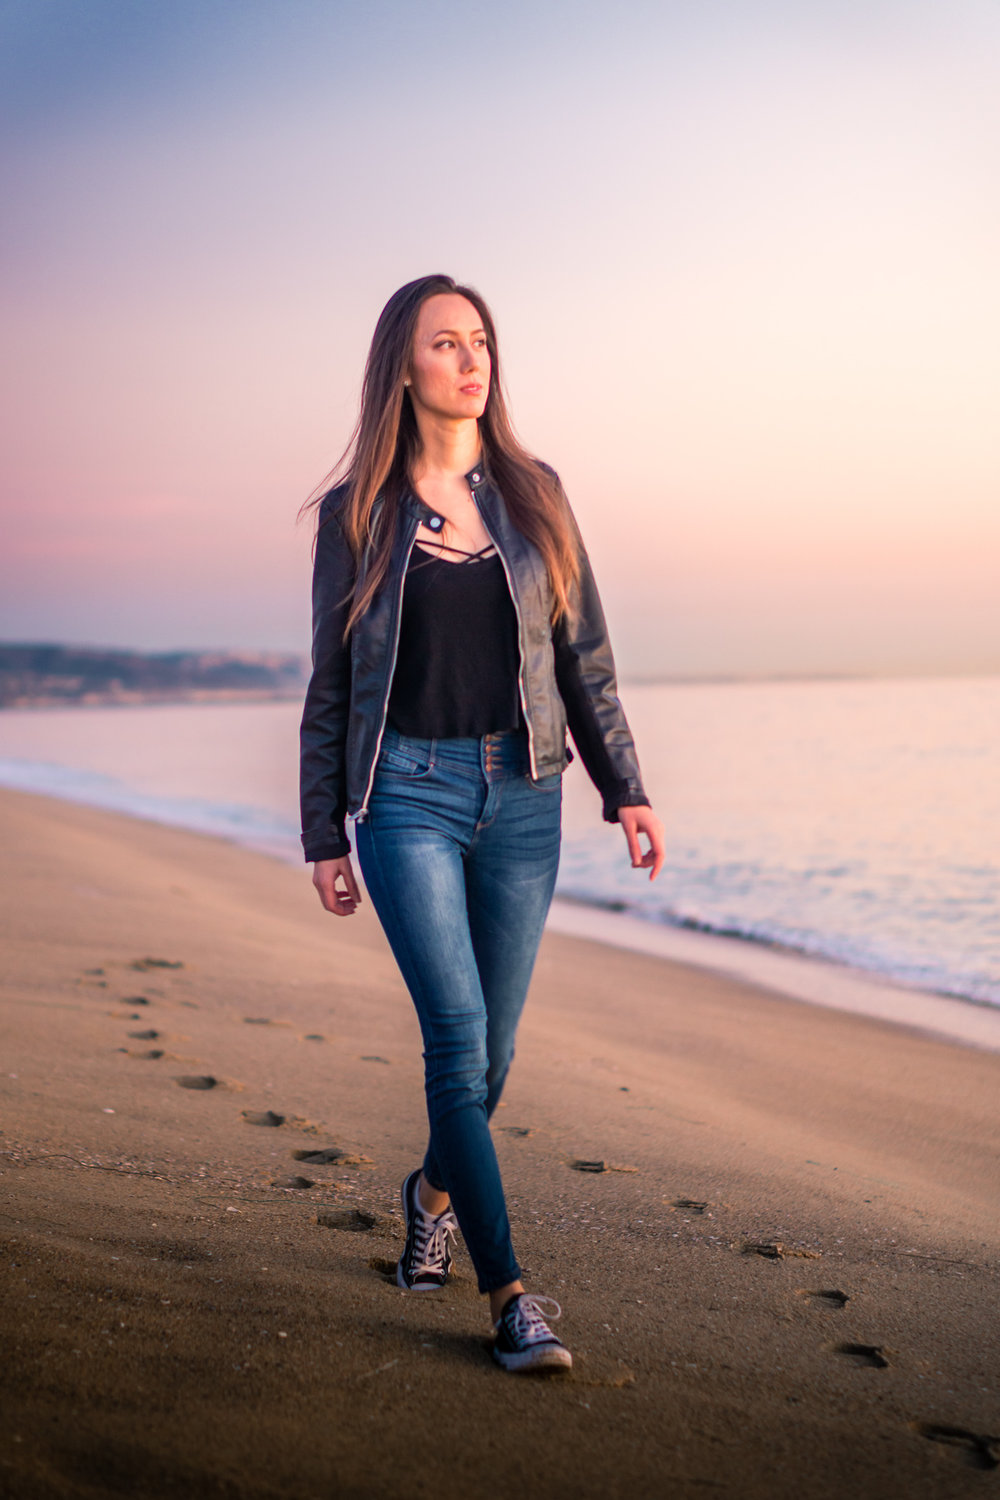 vibrant Natural light Fashion Portrait of woman wearing black leather jacket and blue jeans walking on beach during Golden hour At Balboa Pier in Orange County